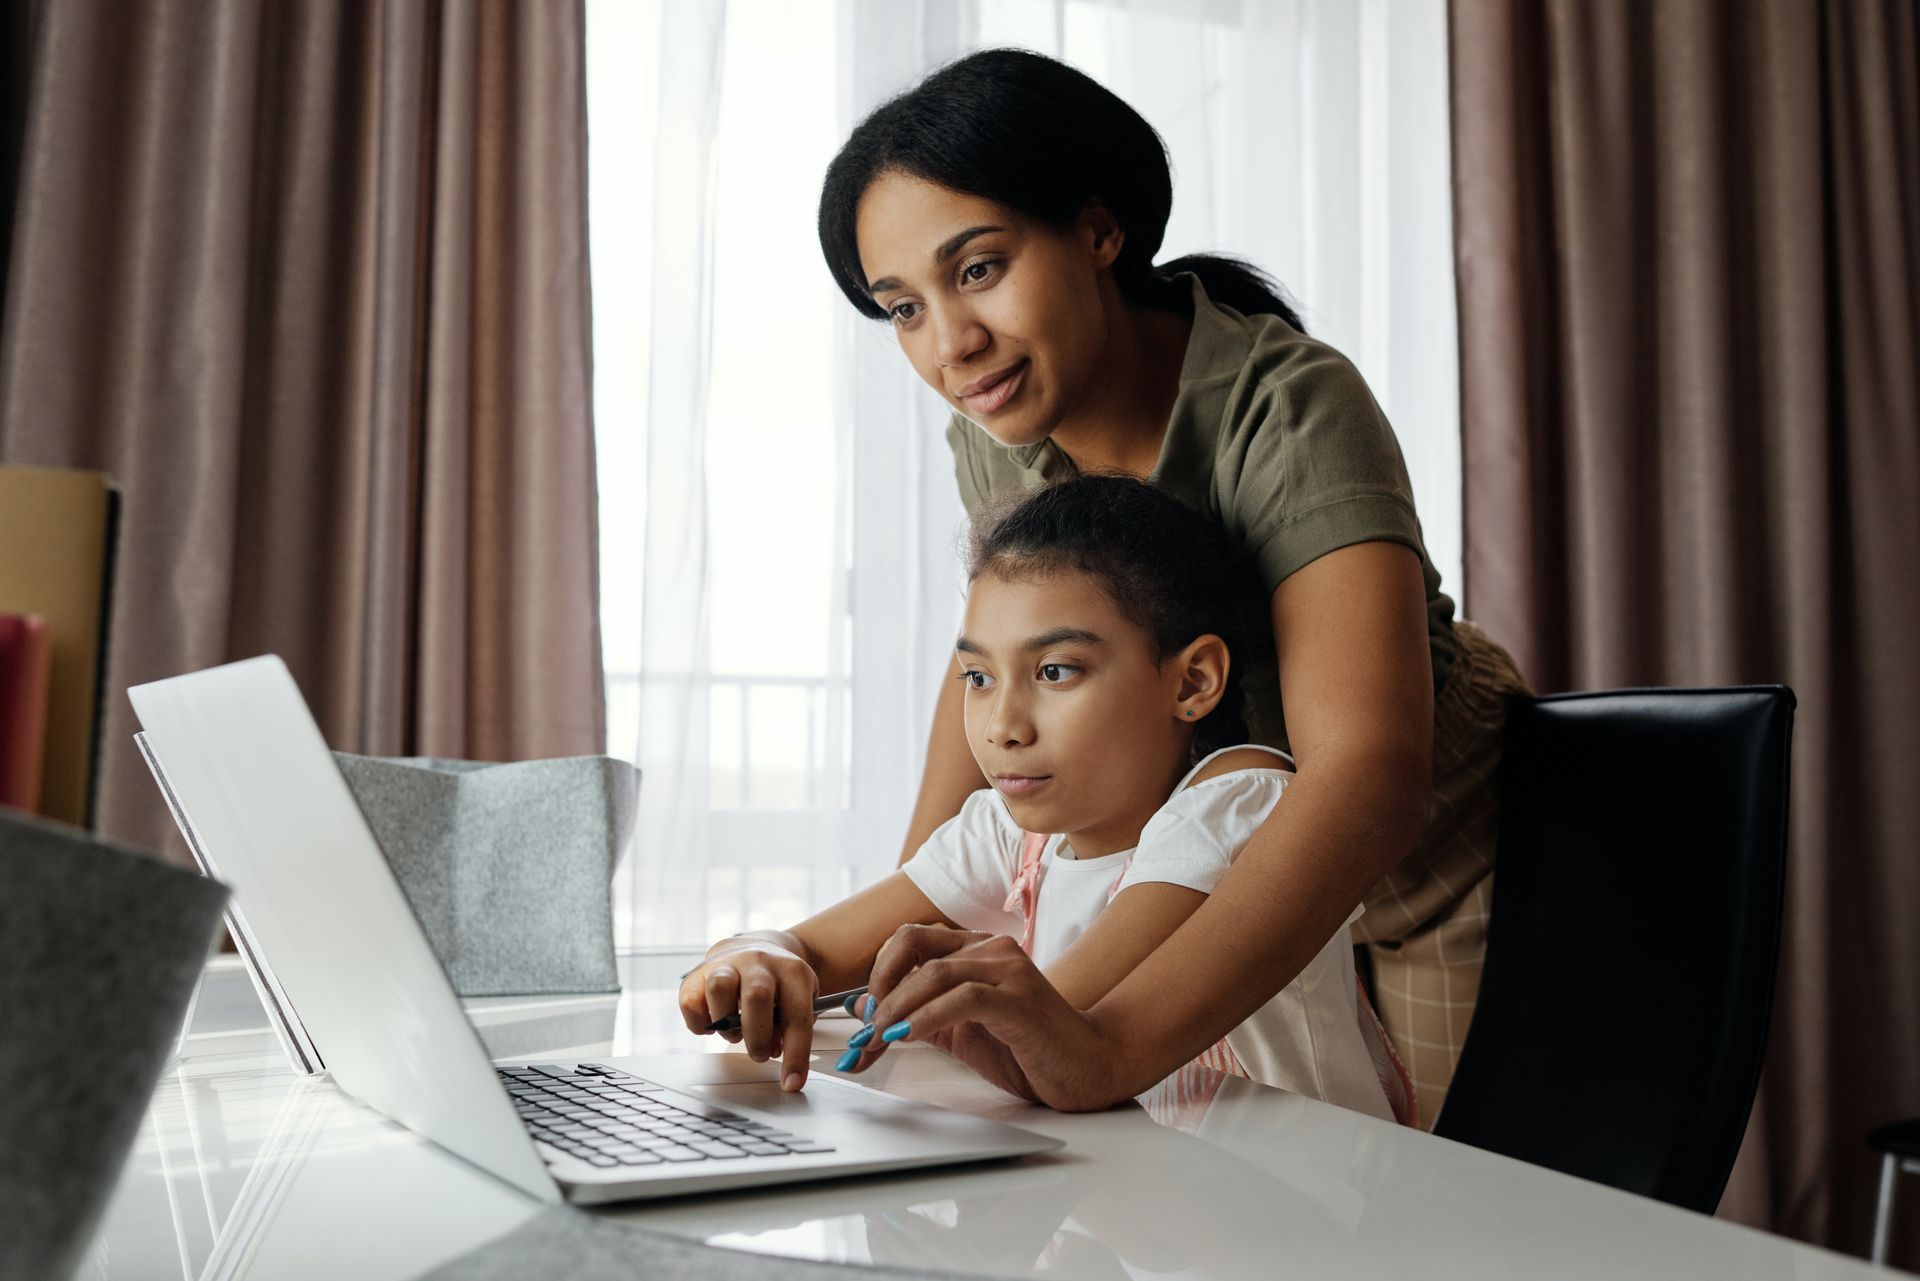 This is an image of a parent helping her dyslexic child with his homework at a laptop computer.